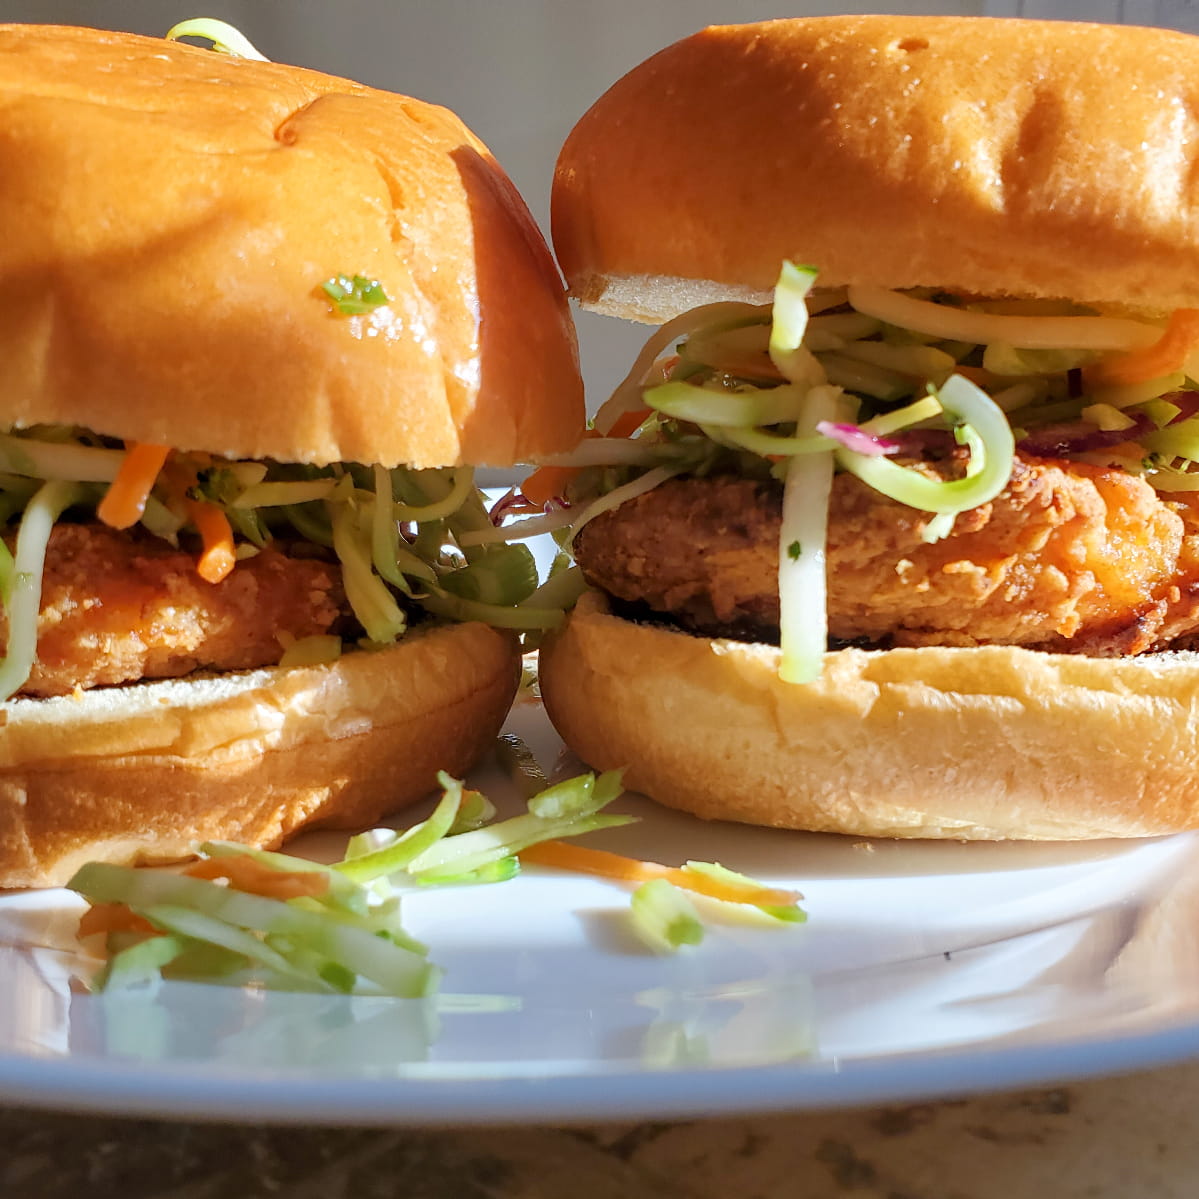 Asian barbeque sandwiches with asian bbq sauce, asian slaw, chicken and a bun